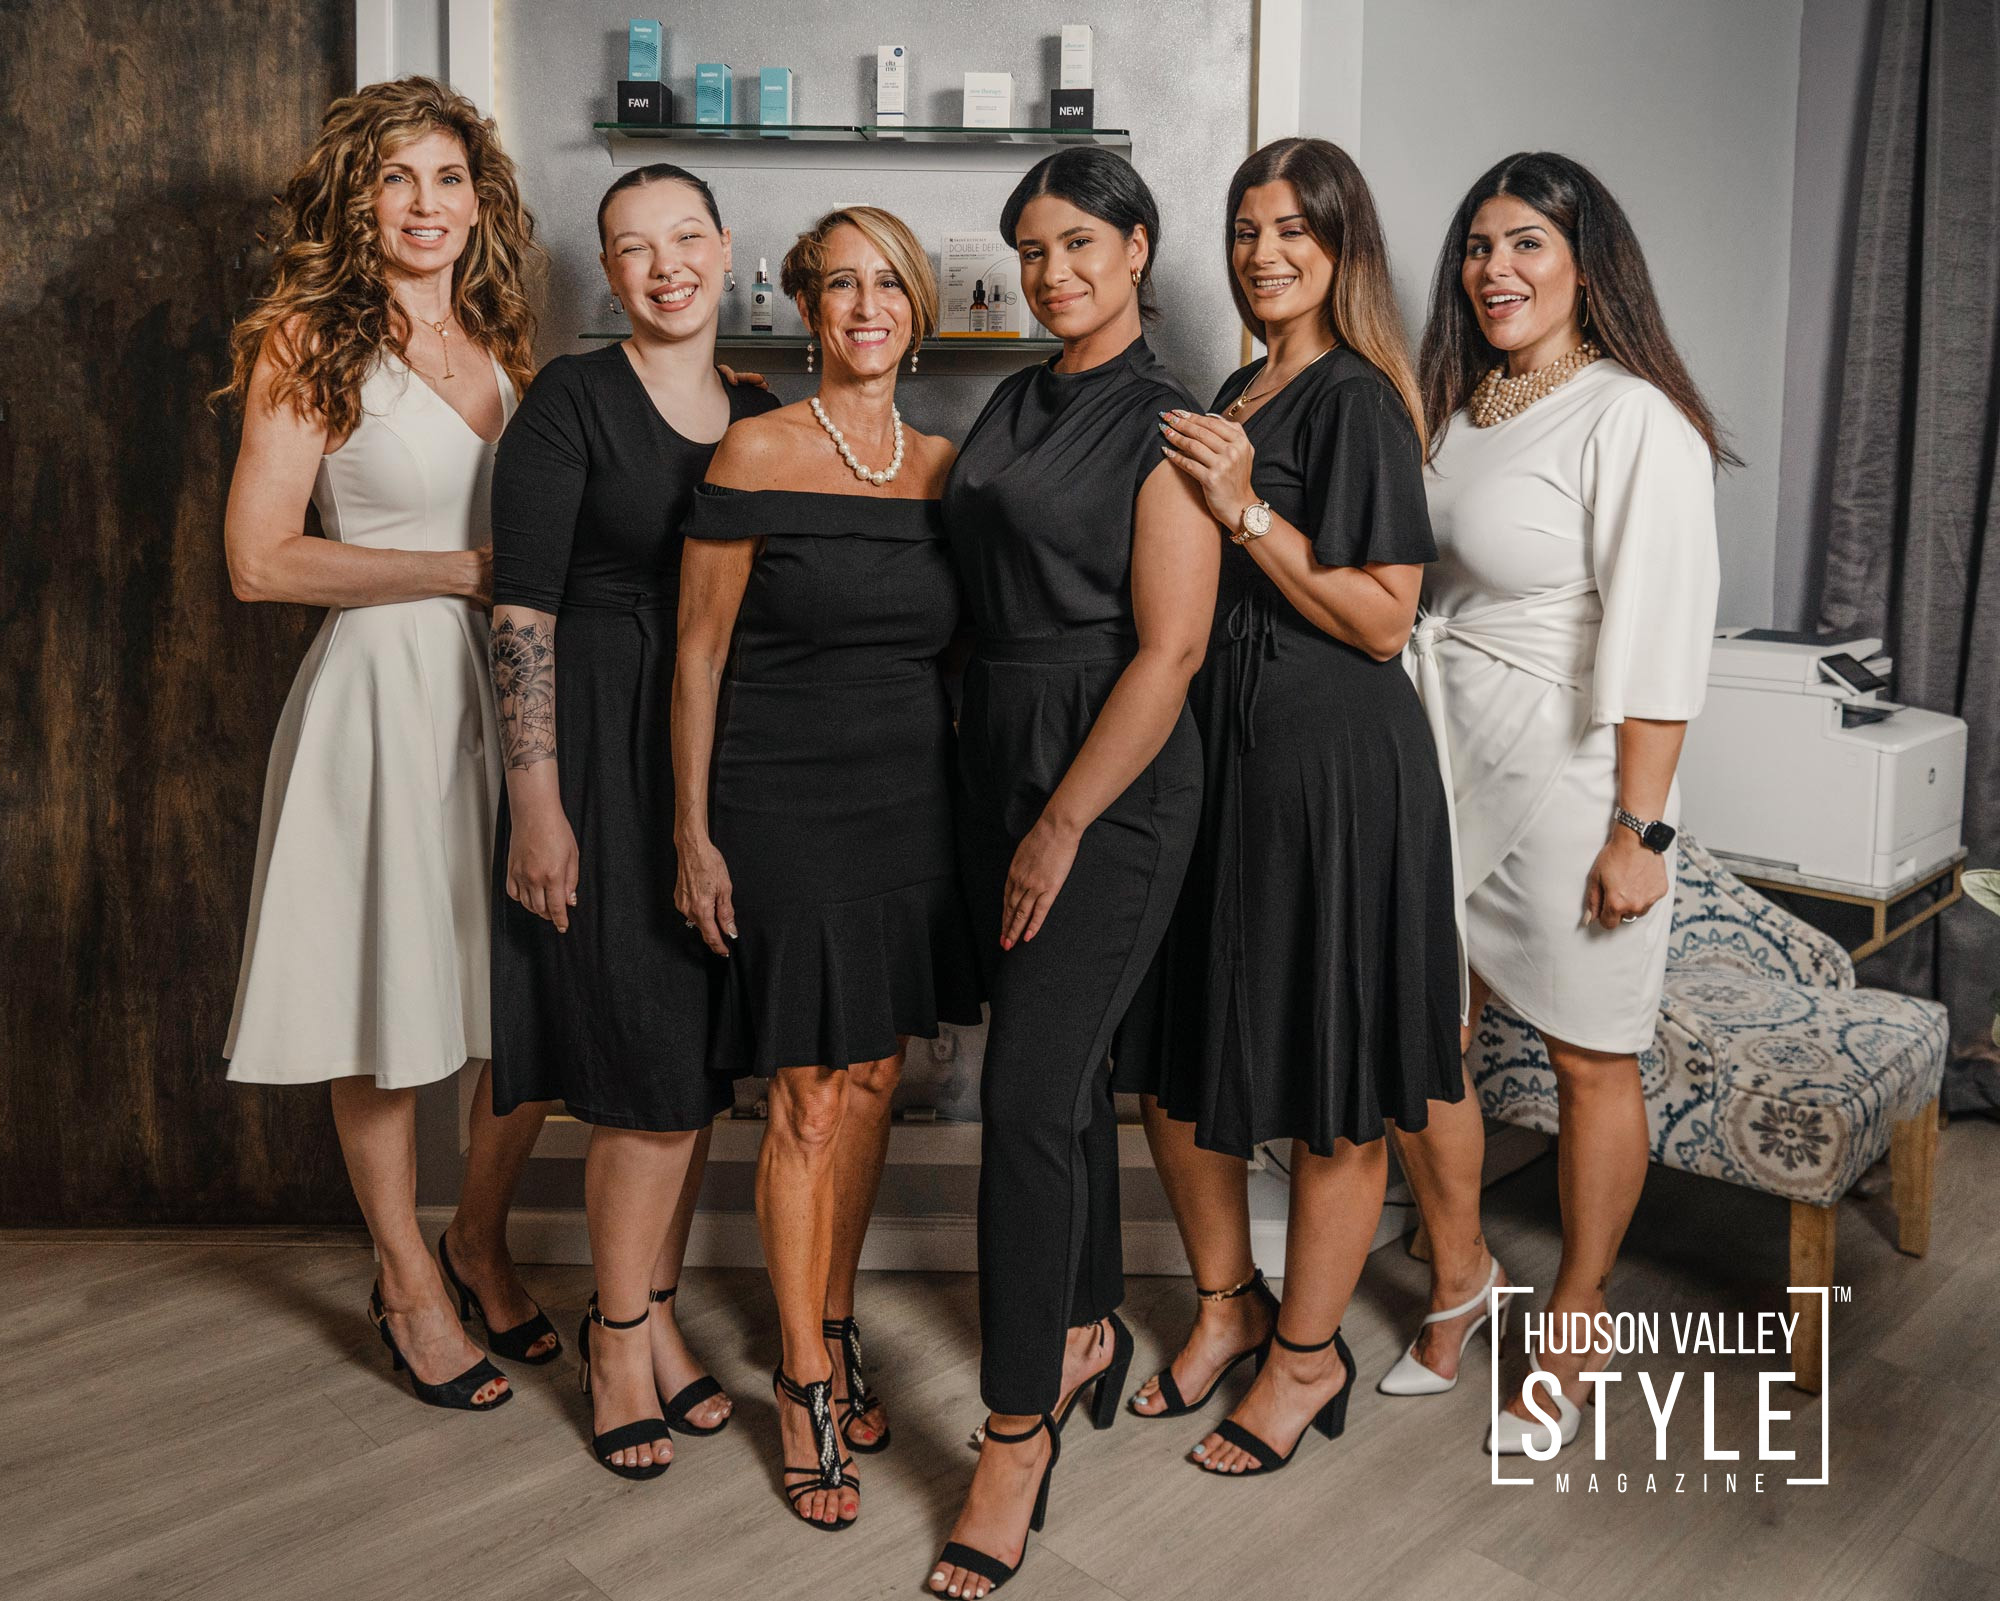 Advanced Skincare Medical Spa: Your One-Stop Shop for Botox and Lip Fillers in the Hudson Valley